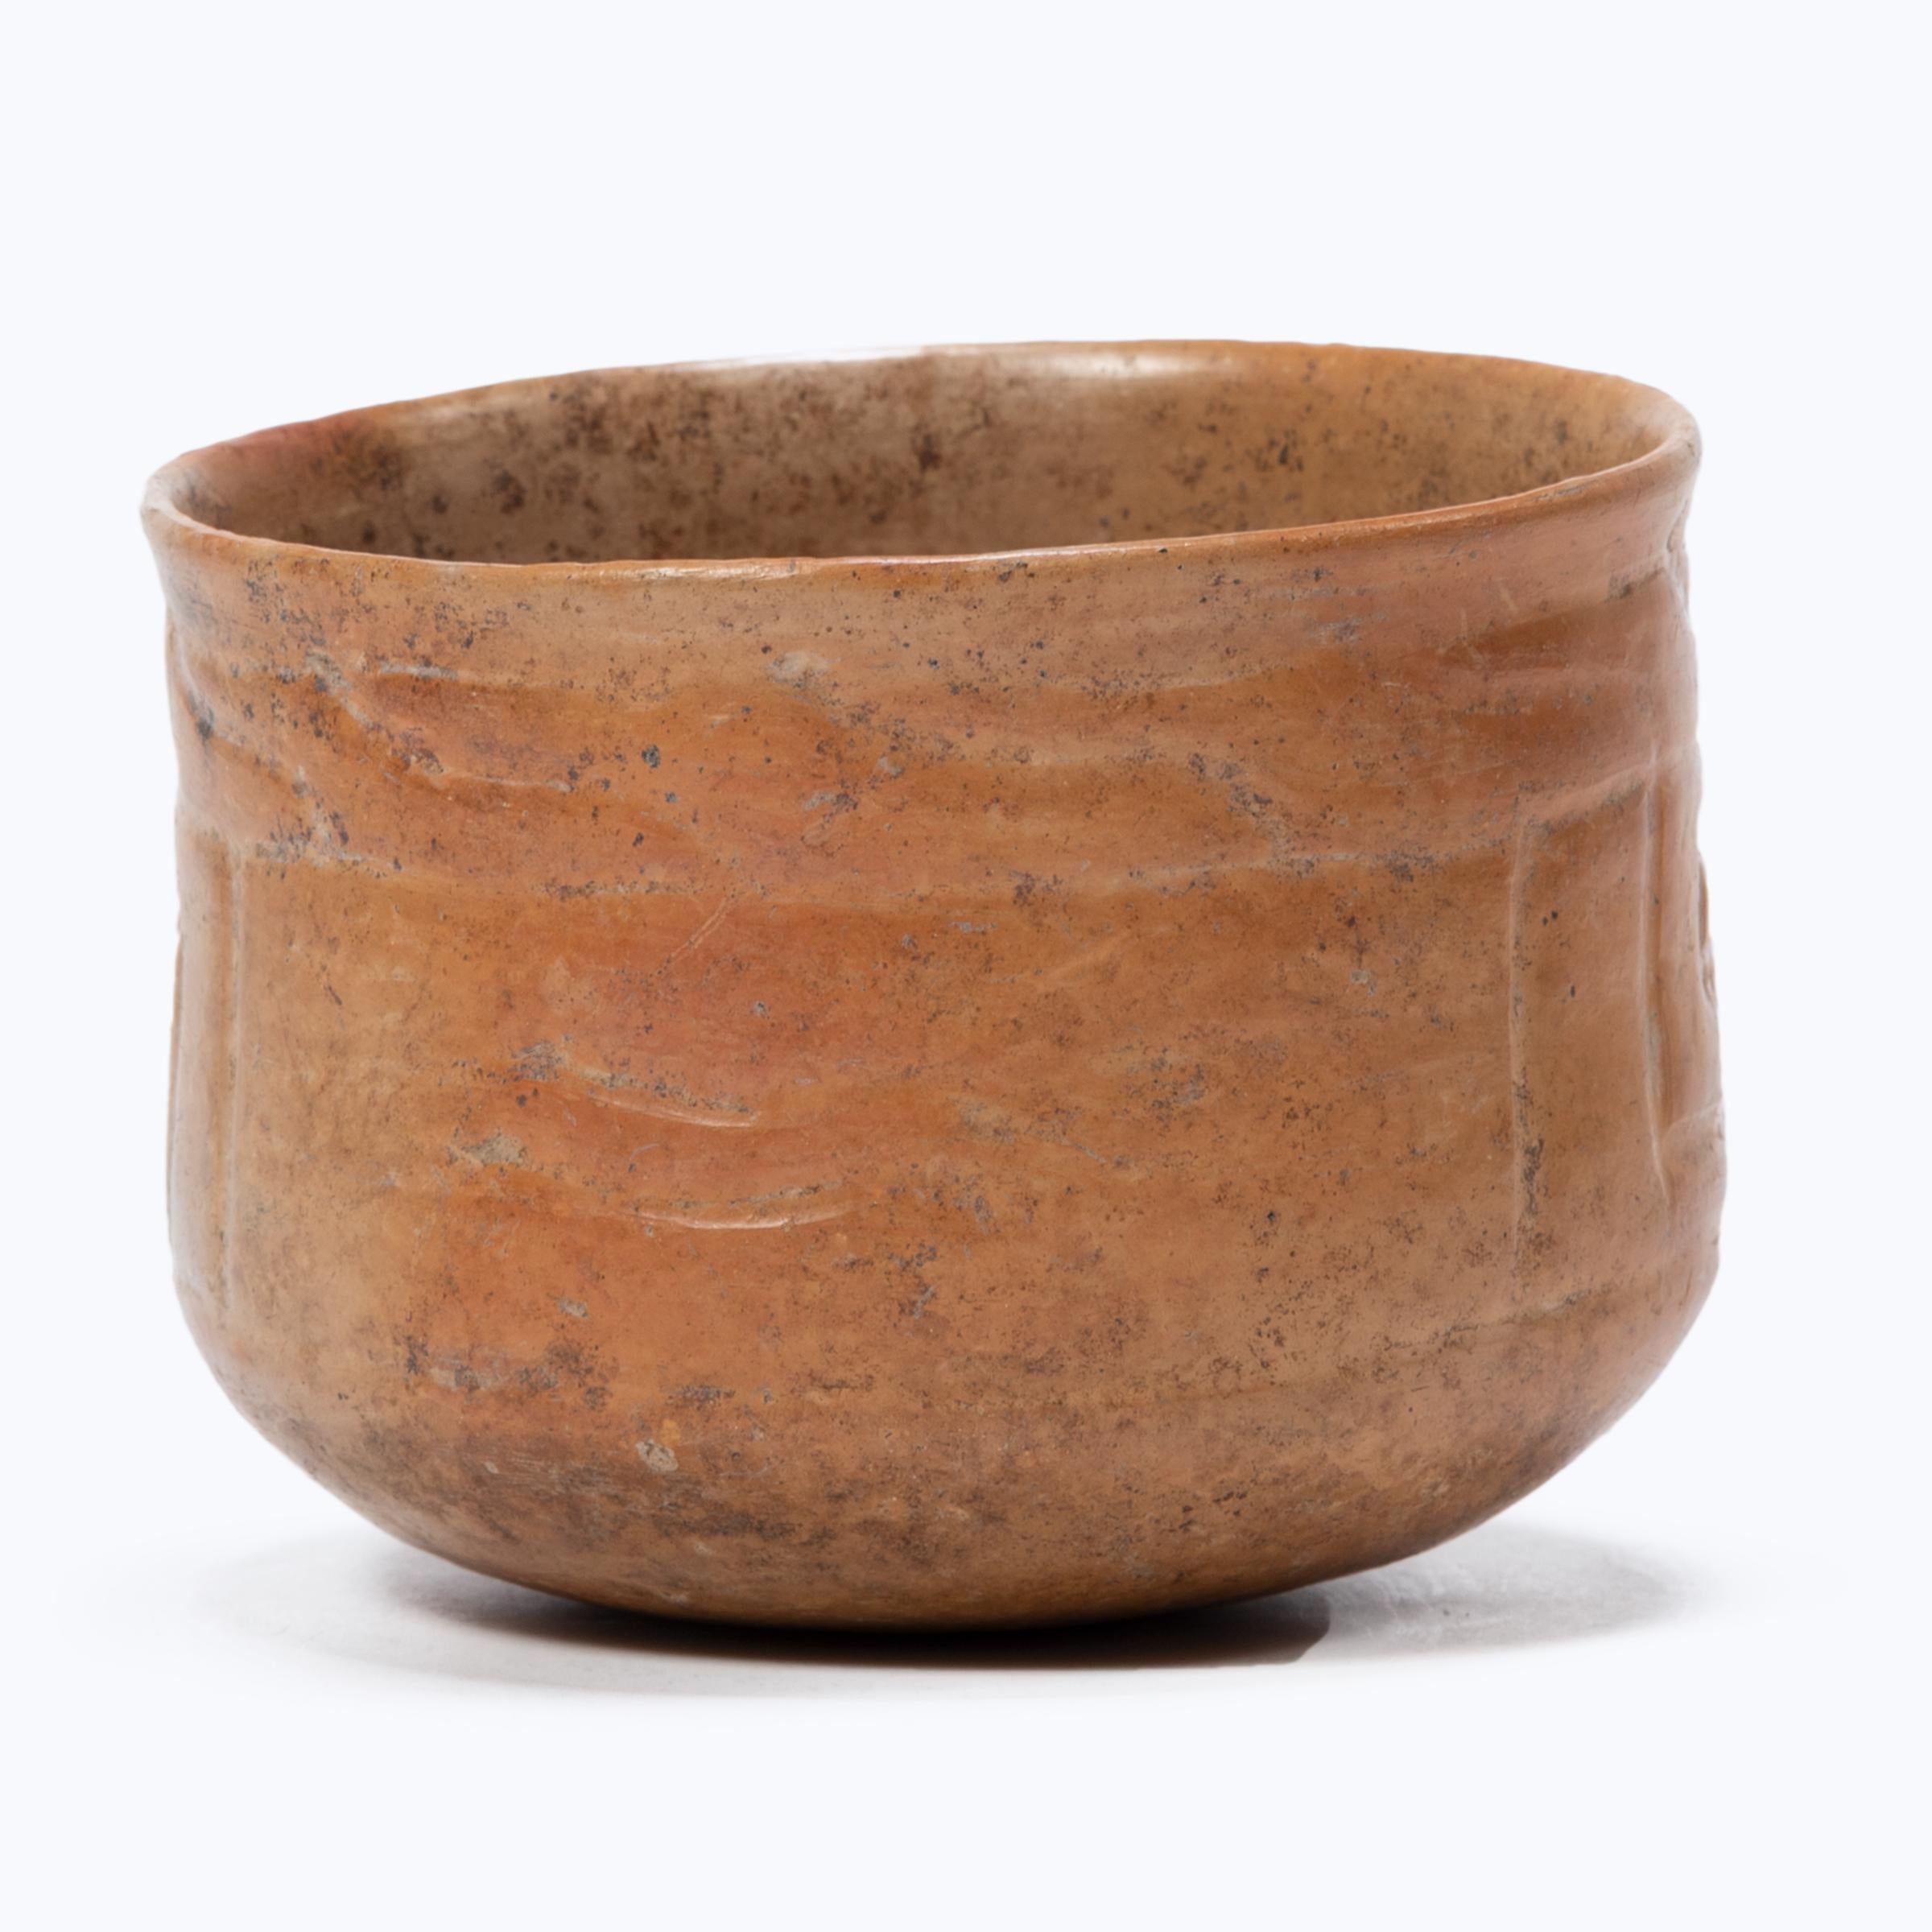 With a beautifully worn, glossy finish, this petite orangeware bowl is a wonderful example of Maya pottery. The delicate bowl is etched with a geometric patterns and coated in a layer of clay slip for a light orange finish. Exposure to combusted